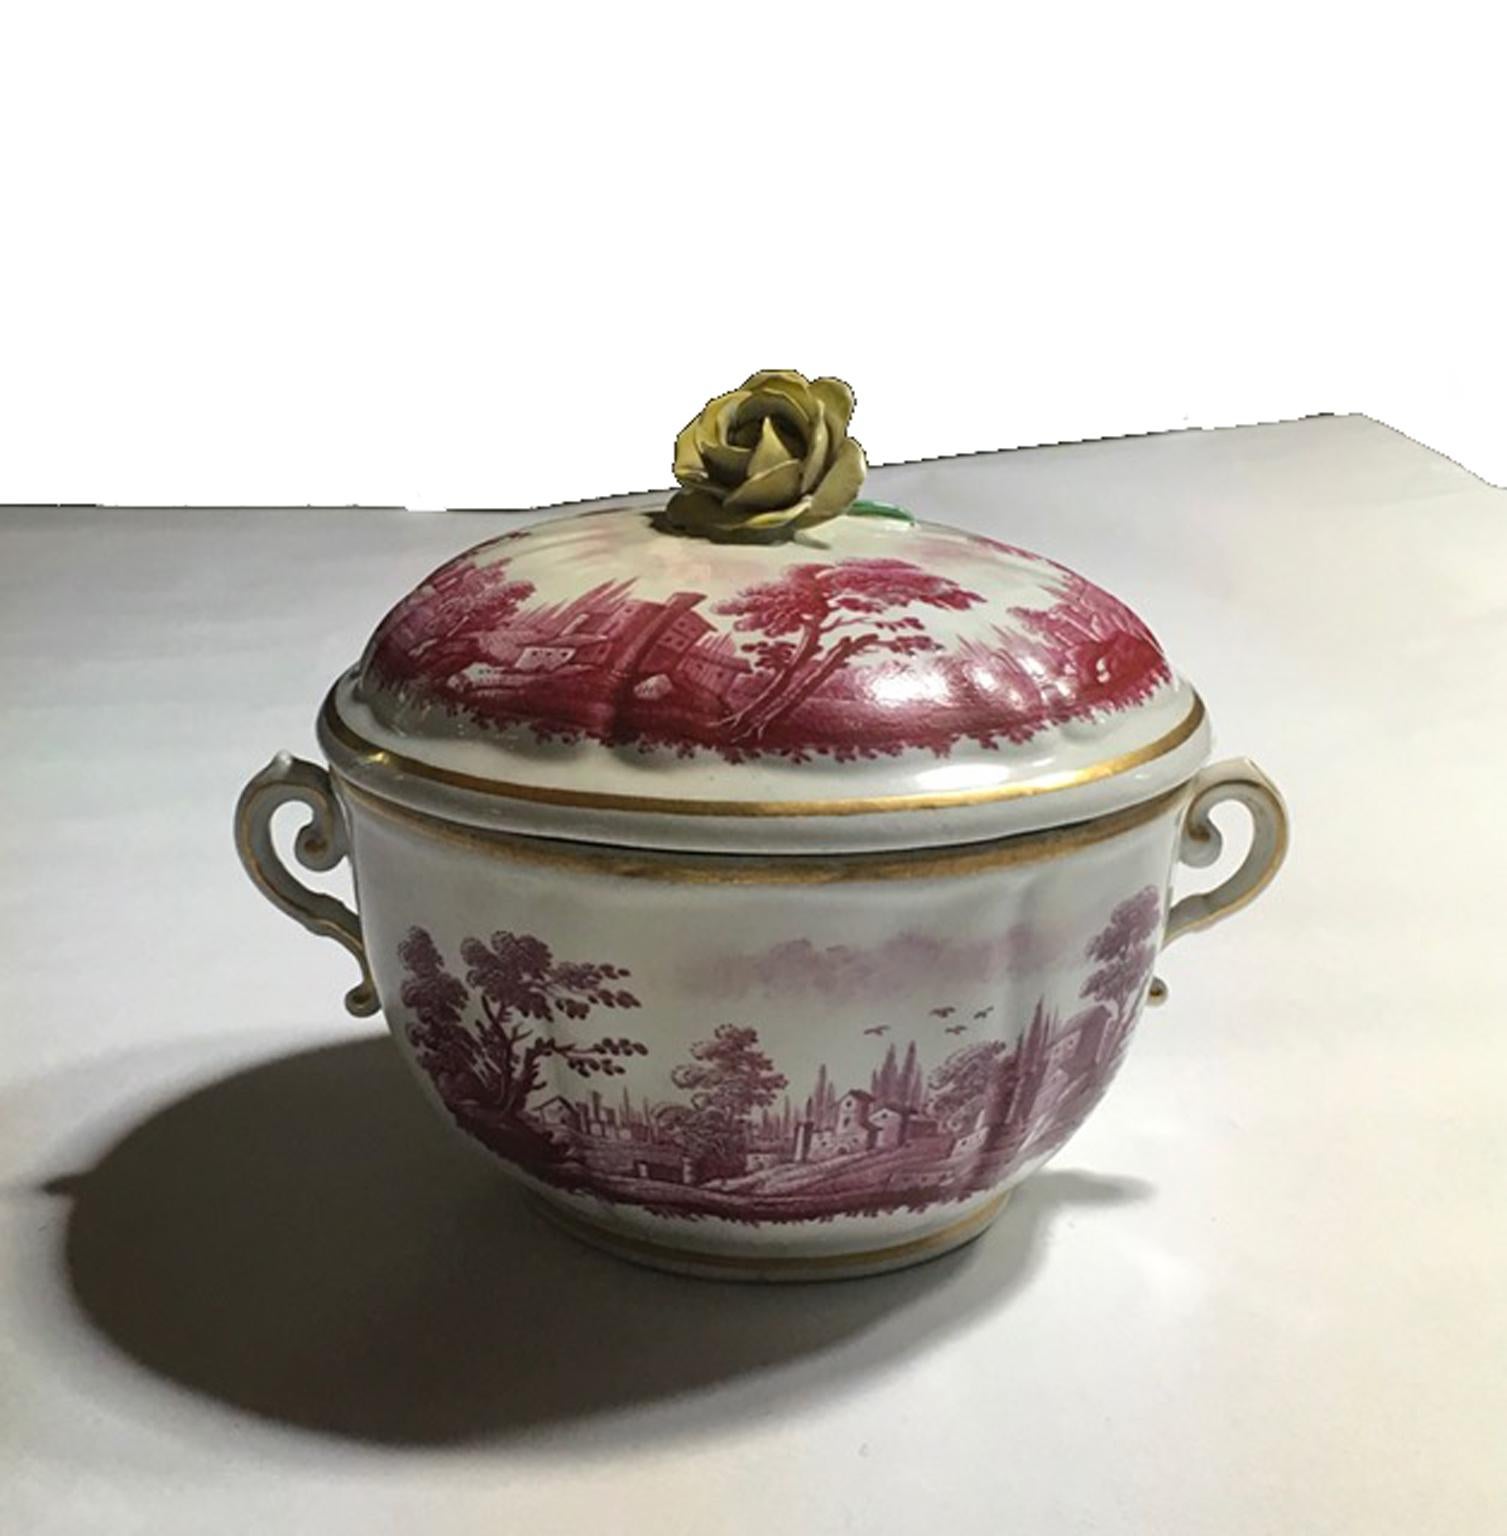 Italian Richard Ginori mid-18th century porcelain covered cup or little covered sauce tureen painted with landscapes in fuchsia color

This beautiful covered cup it was hand painted in the Flemish style, with its Italian countryside landscapes